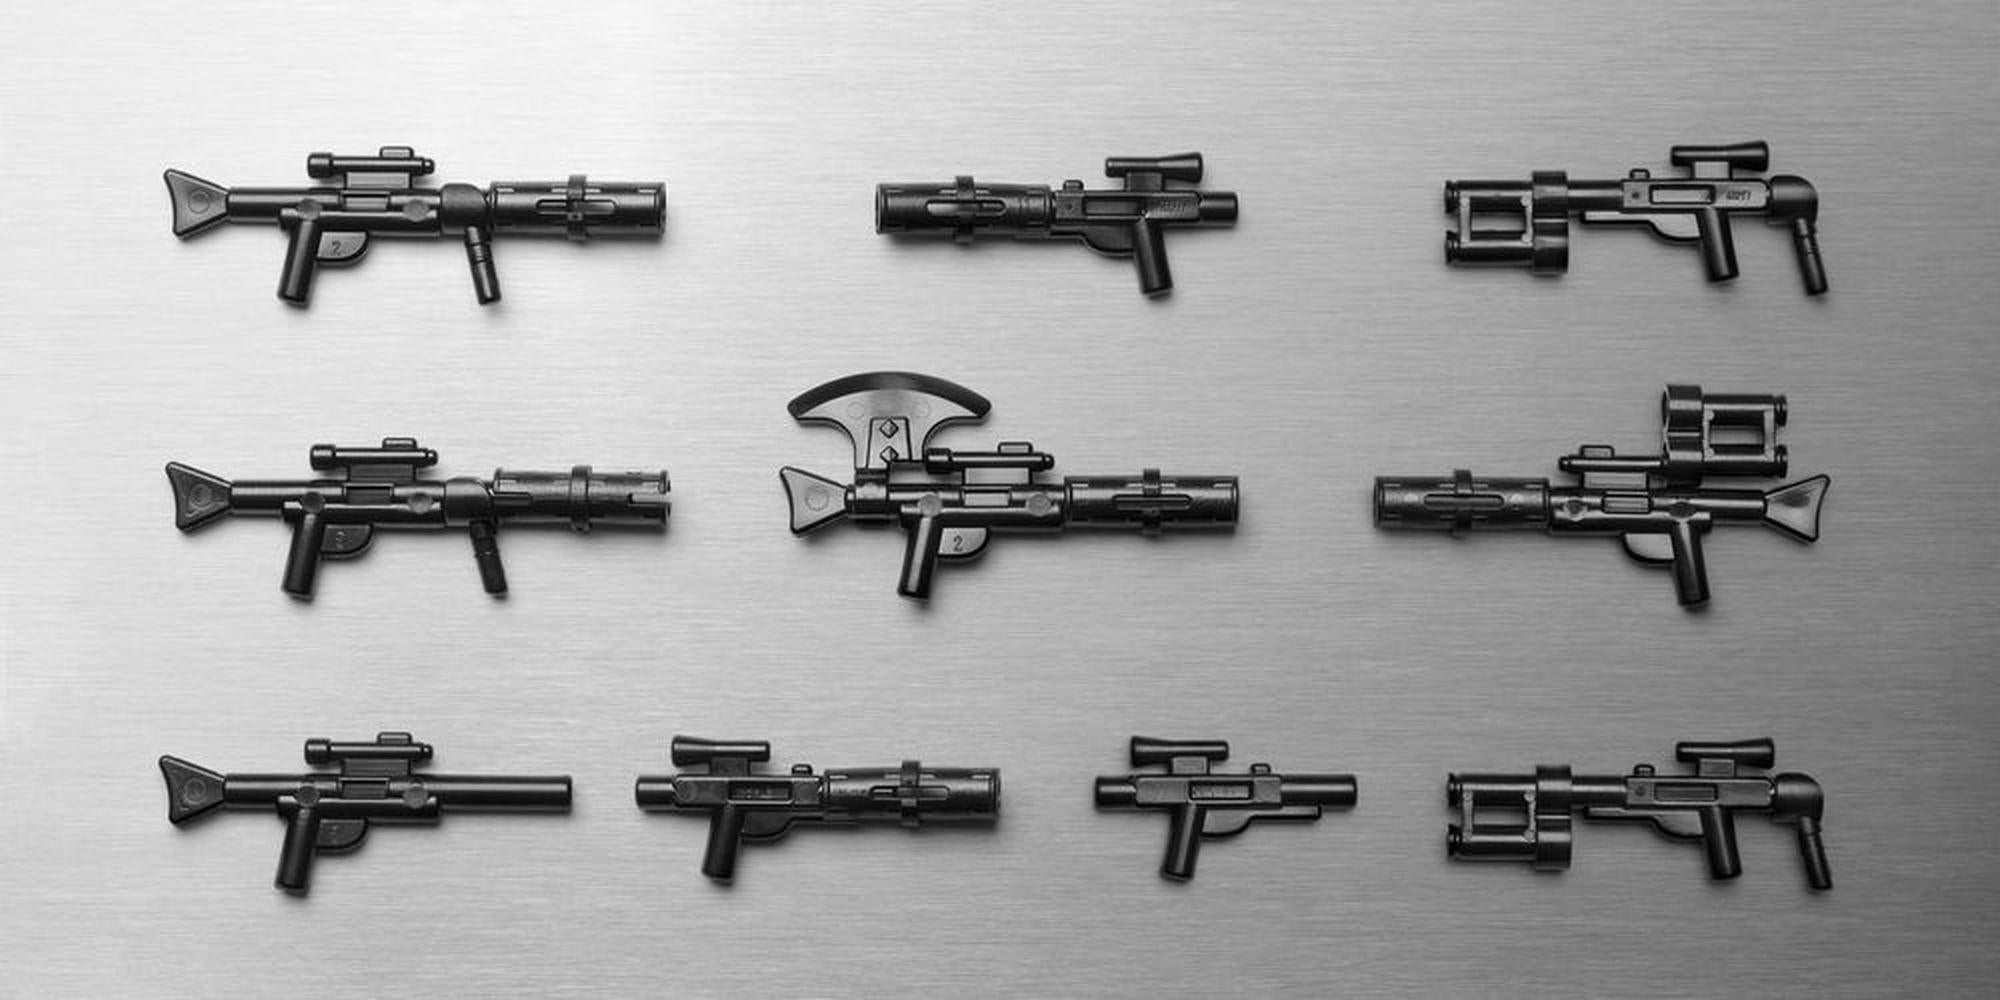 Armory / Multimedia Print of Guns / Edition 18 of 18 